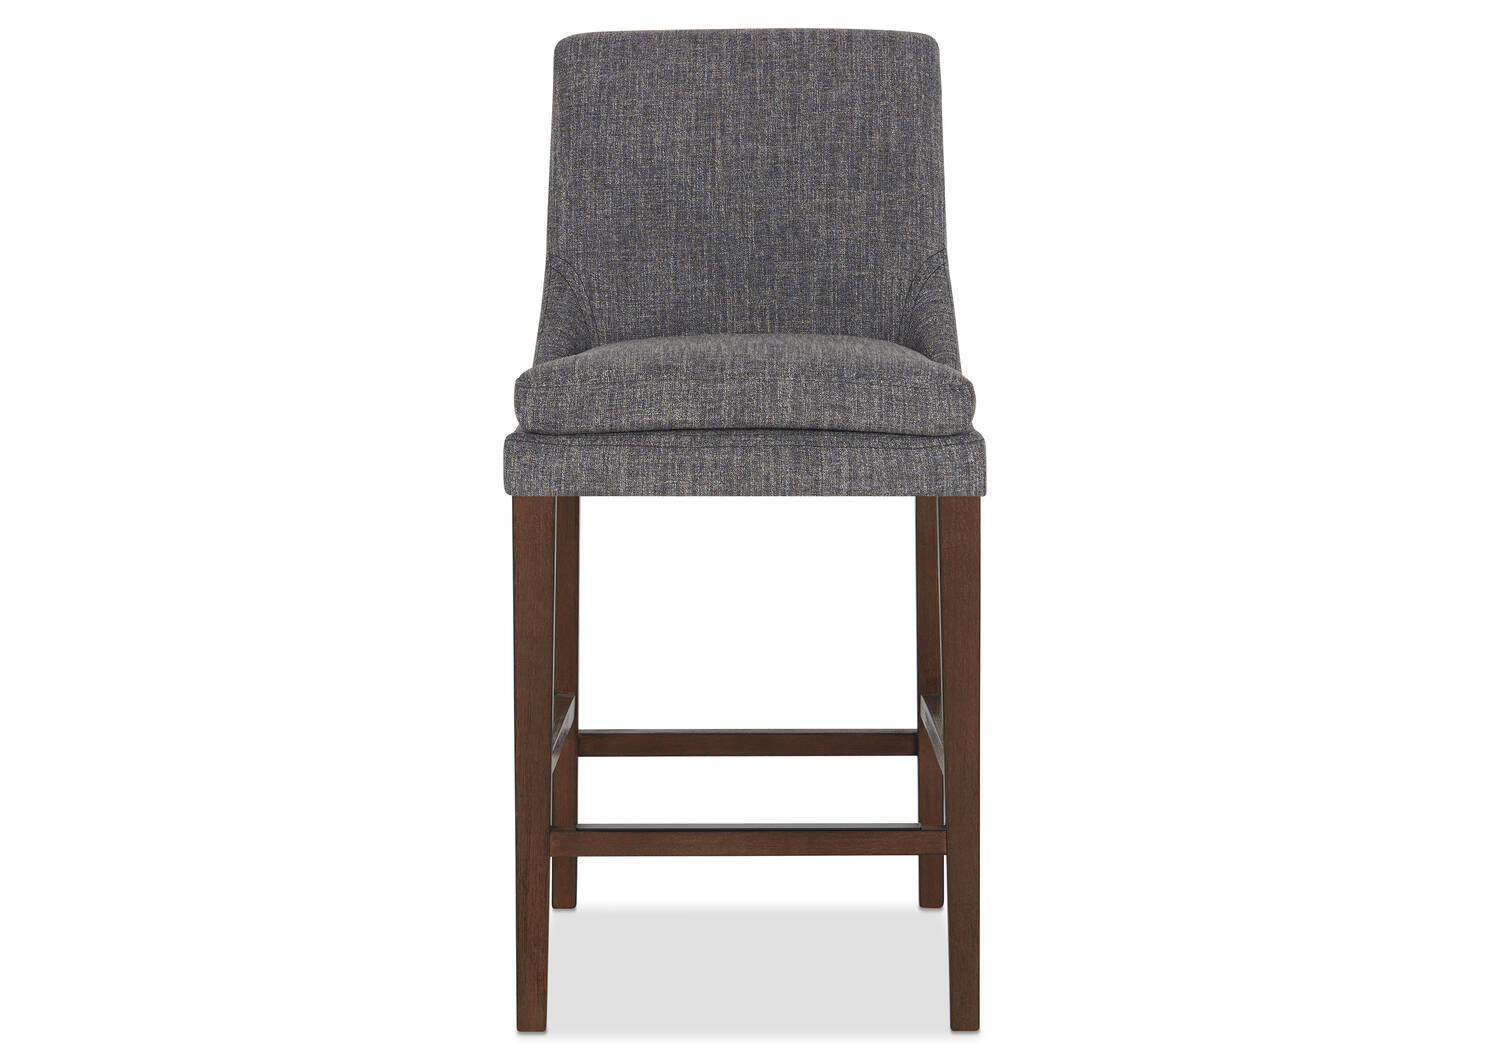 Montana Counter Stool -Lund Charcoal